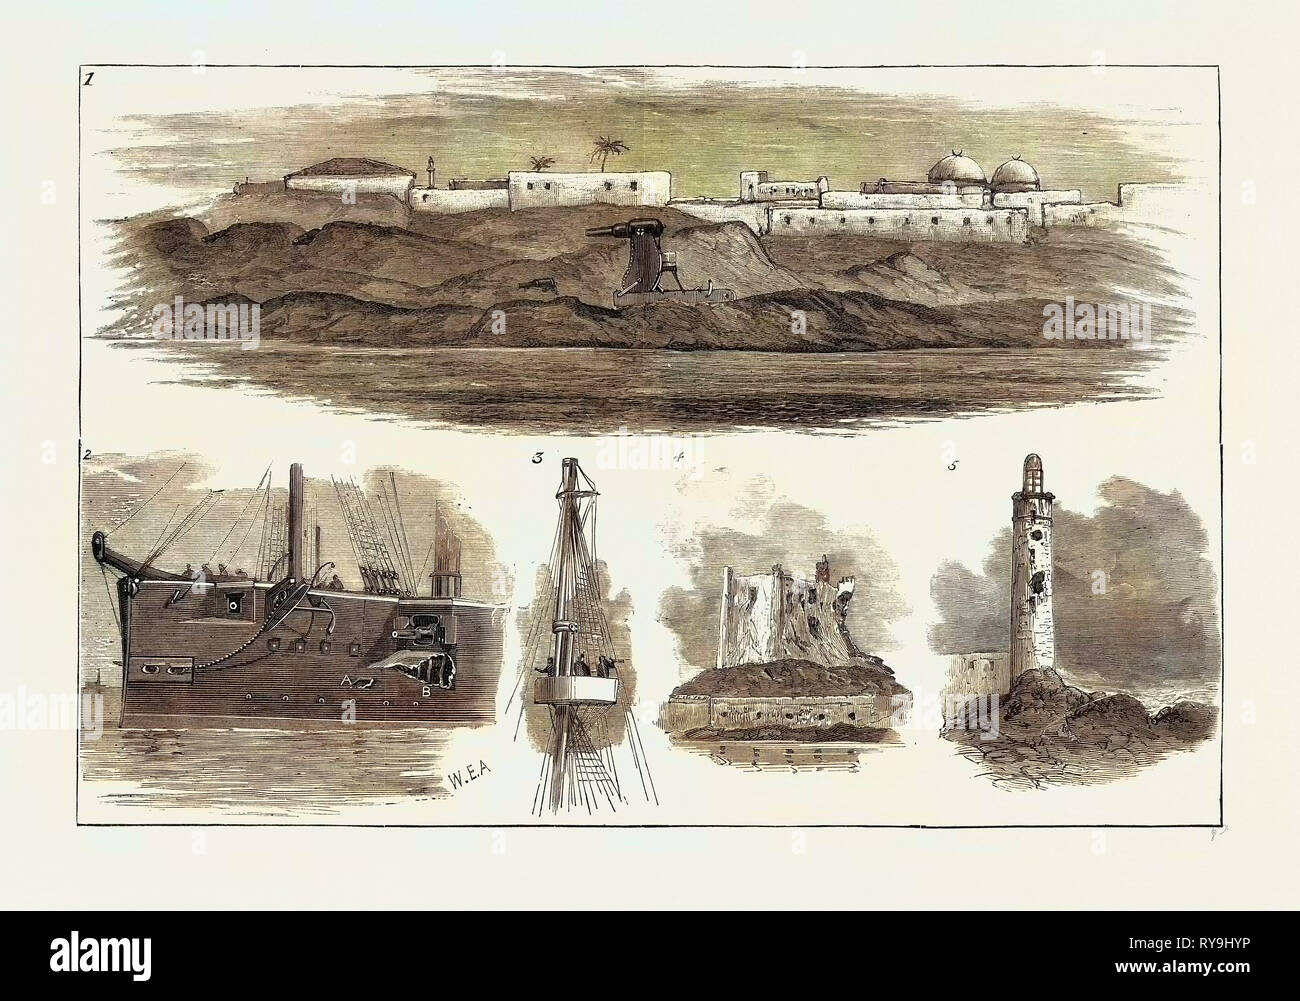 The War in Egypt: After the Bombardment of Alexandria, July 11, 1882: 1. Rifled Guns on Moncrieff Carriages in the Fortifications, 2. Damage Sustained by H.M.S. 'Superb' During the Action, A. The Place Where a Shell Entered, B. Result of the Bursting of the Shell, 3. A Ship's 'Top' in Fighting Trim, 4. Tower, Fort Pharos, 5. The Lighthouse, Showing the Damage Done by the British Artillery Stock Photo